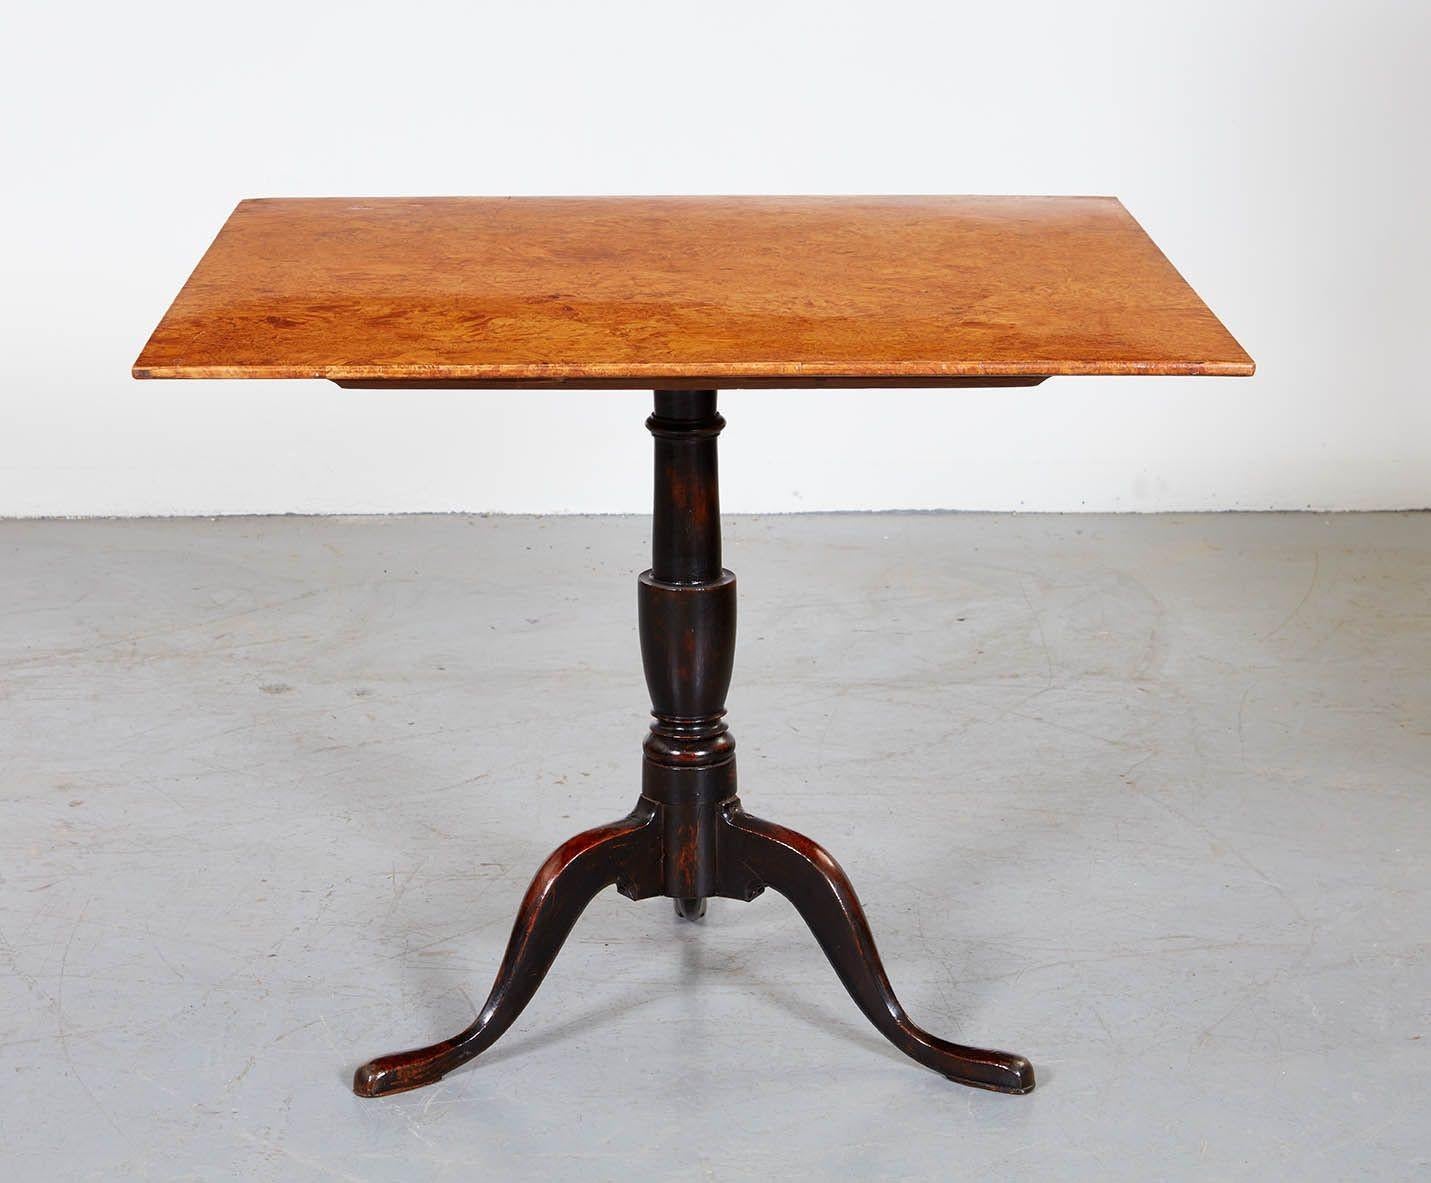 Fine Swedish early 19th century tilt top table, with the square top beautifully conceived in birch root burl veneer, on a pegged tilt hinge above an ebonized base with vasiform shaft over three slipper feet, the whole of striking design and